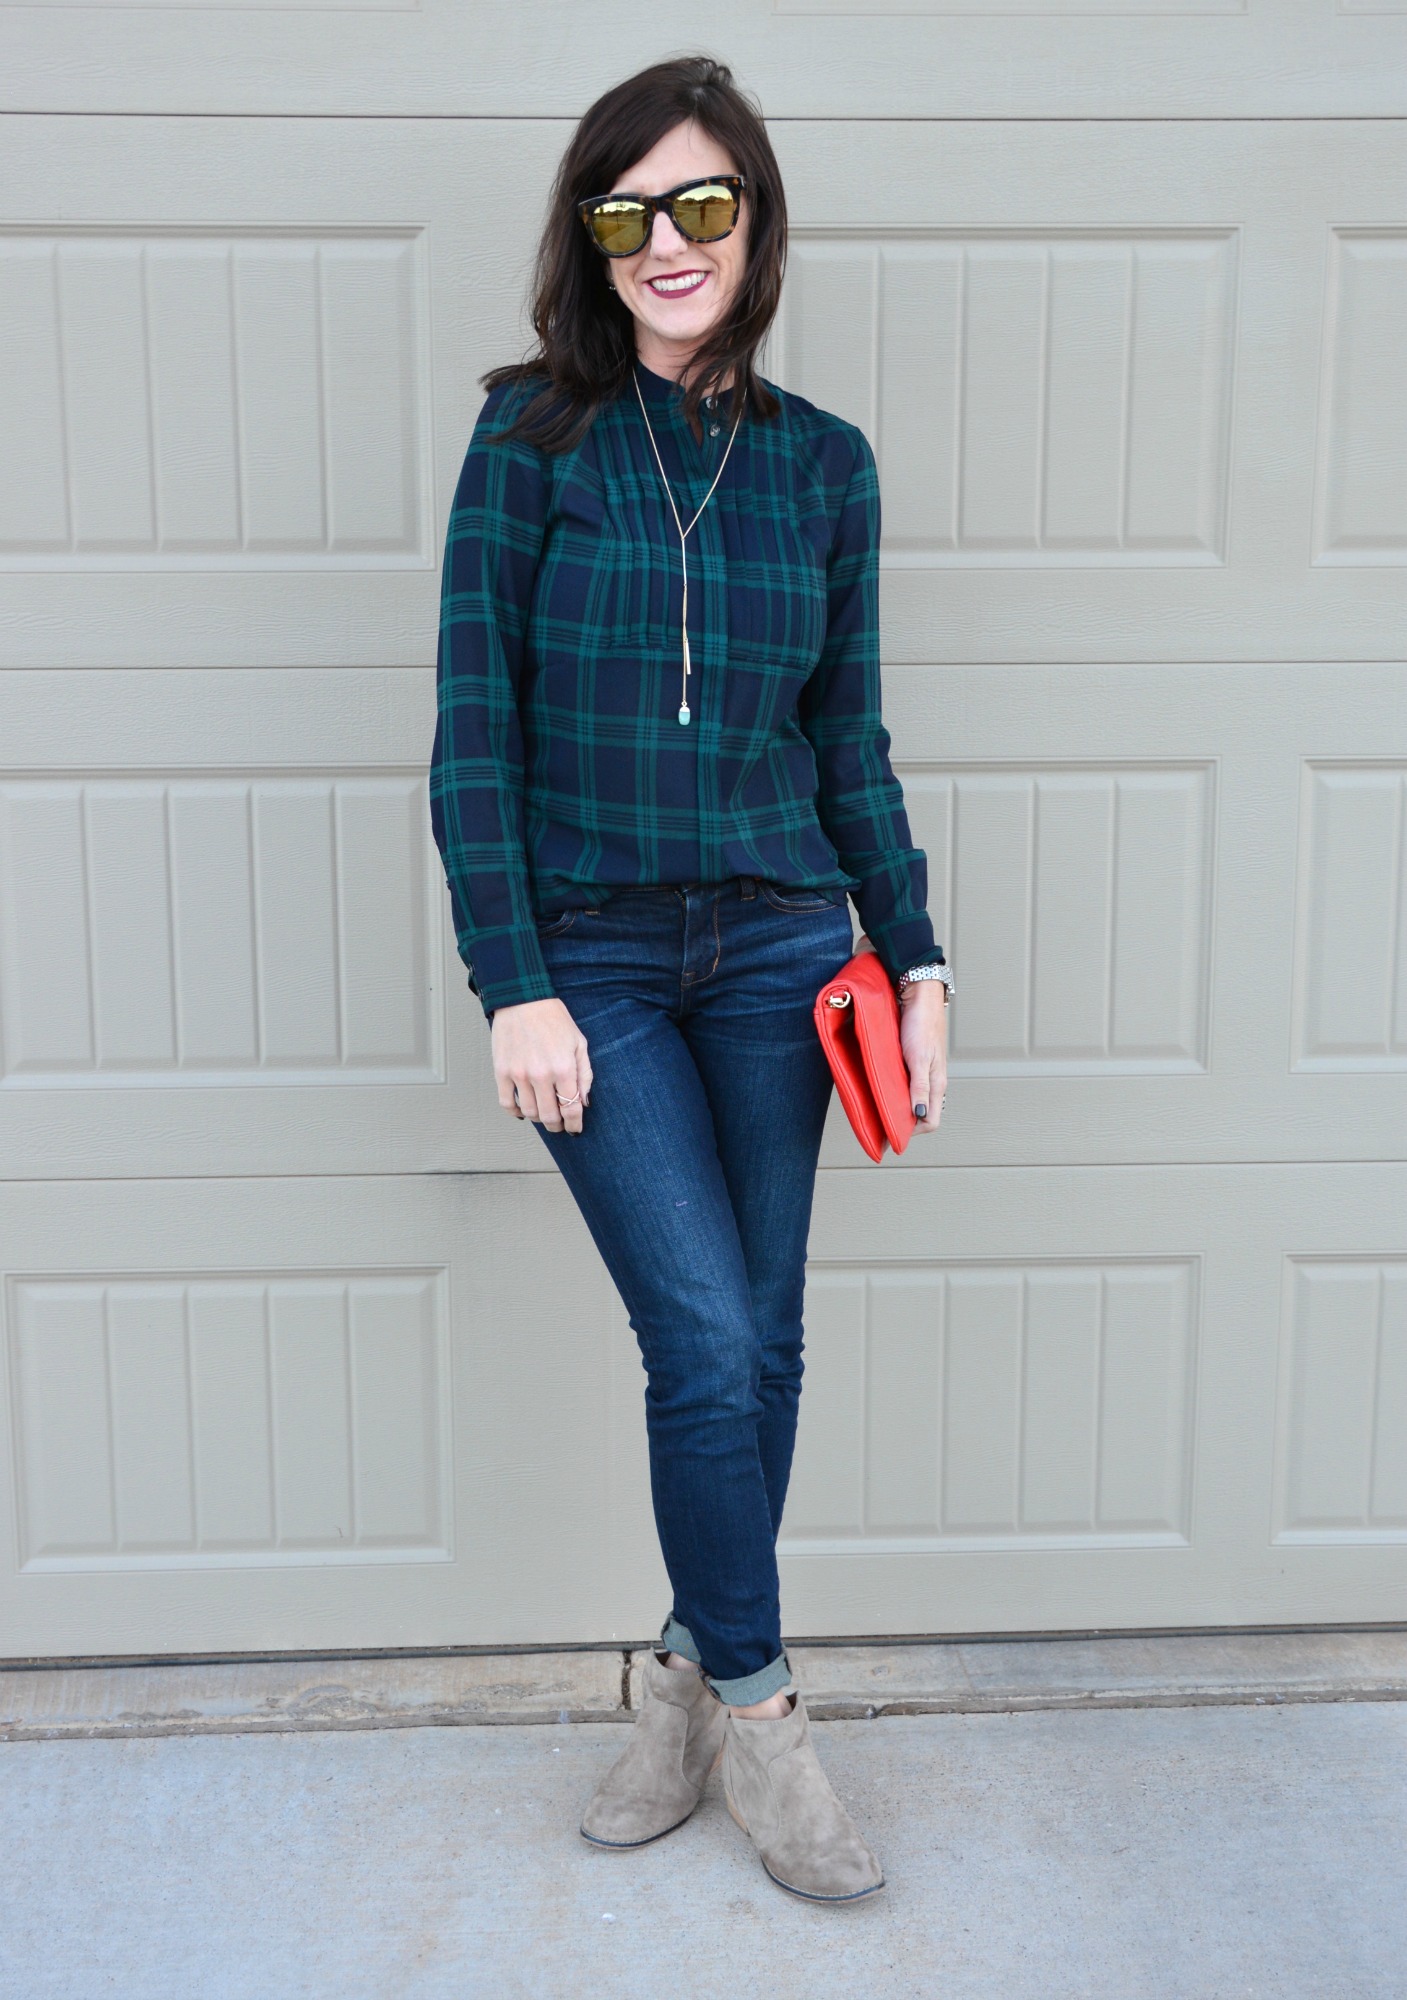 Casual Friday Link Up - JCrew - Two Thirty-Five Designs